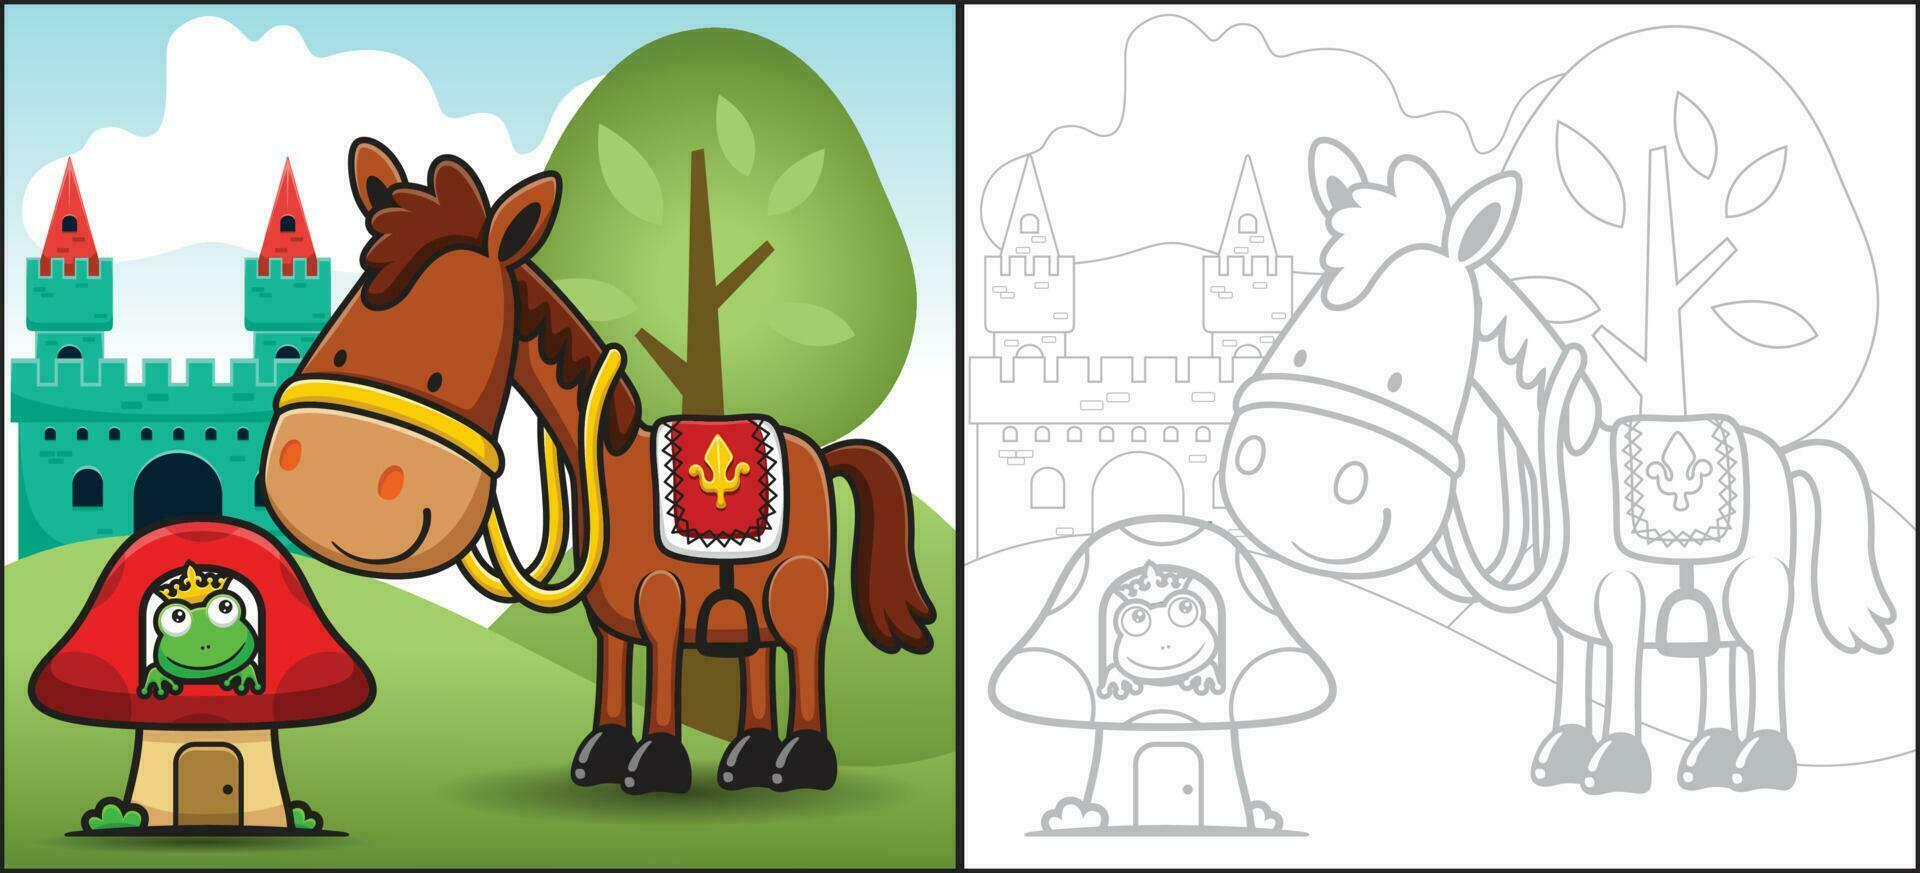 Cartoon of horse with frog wearing crown in mushroom house on castle background. Coloring book or page vector